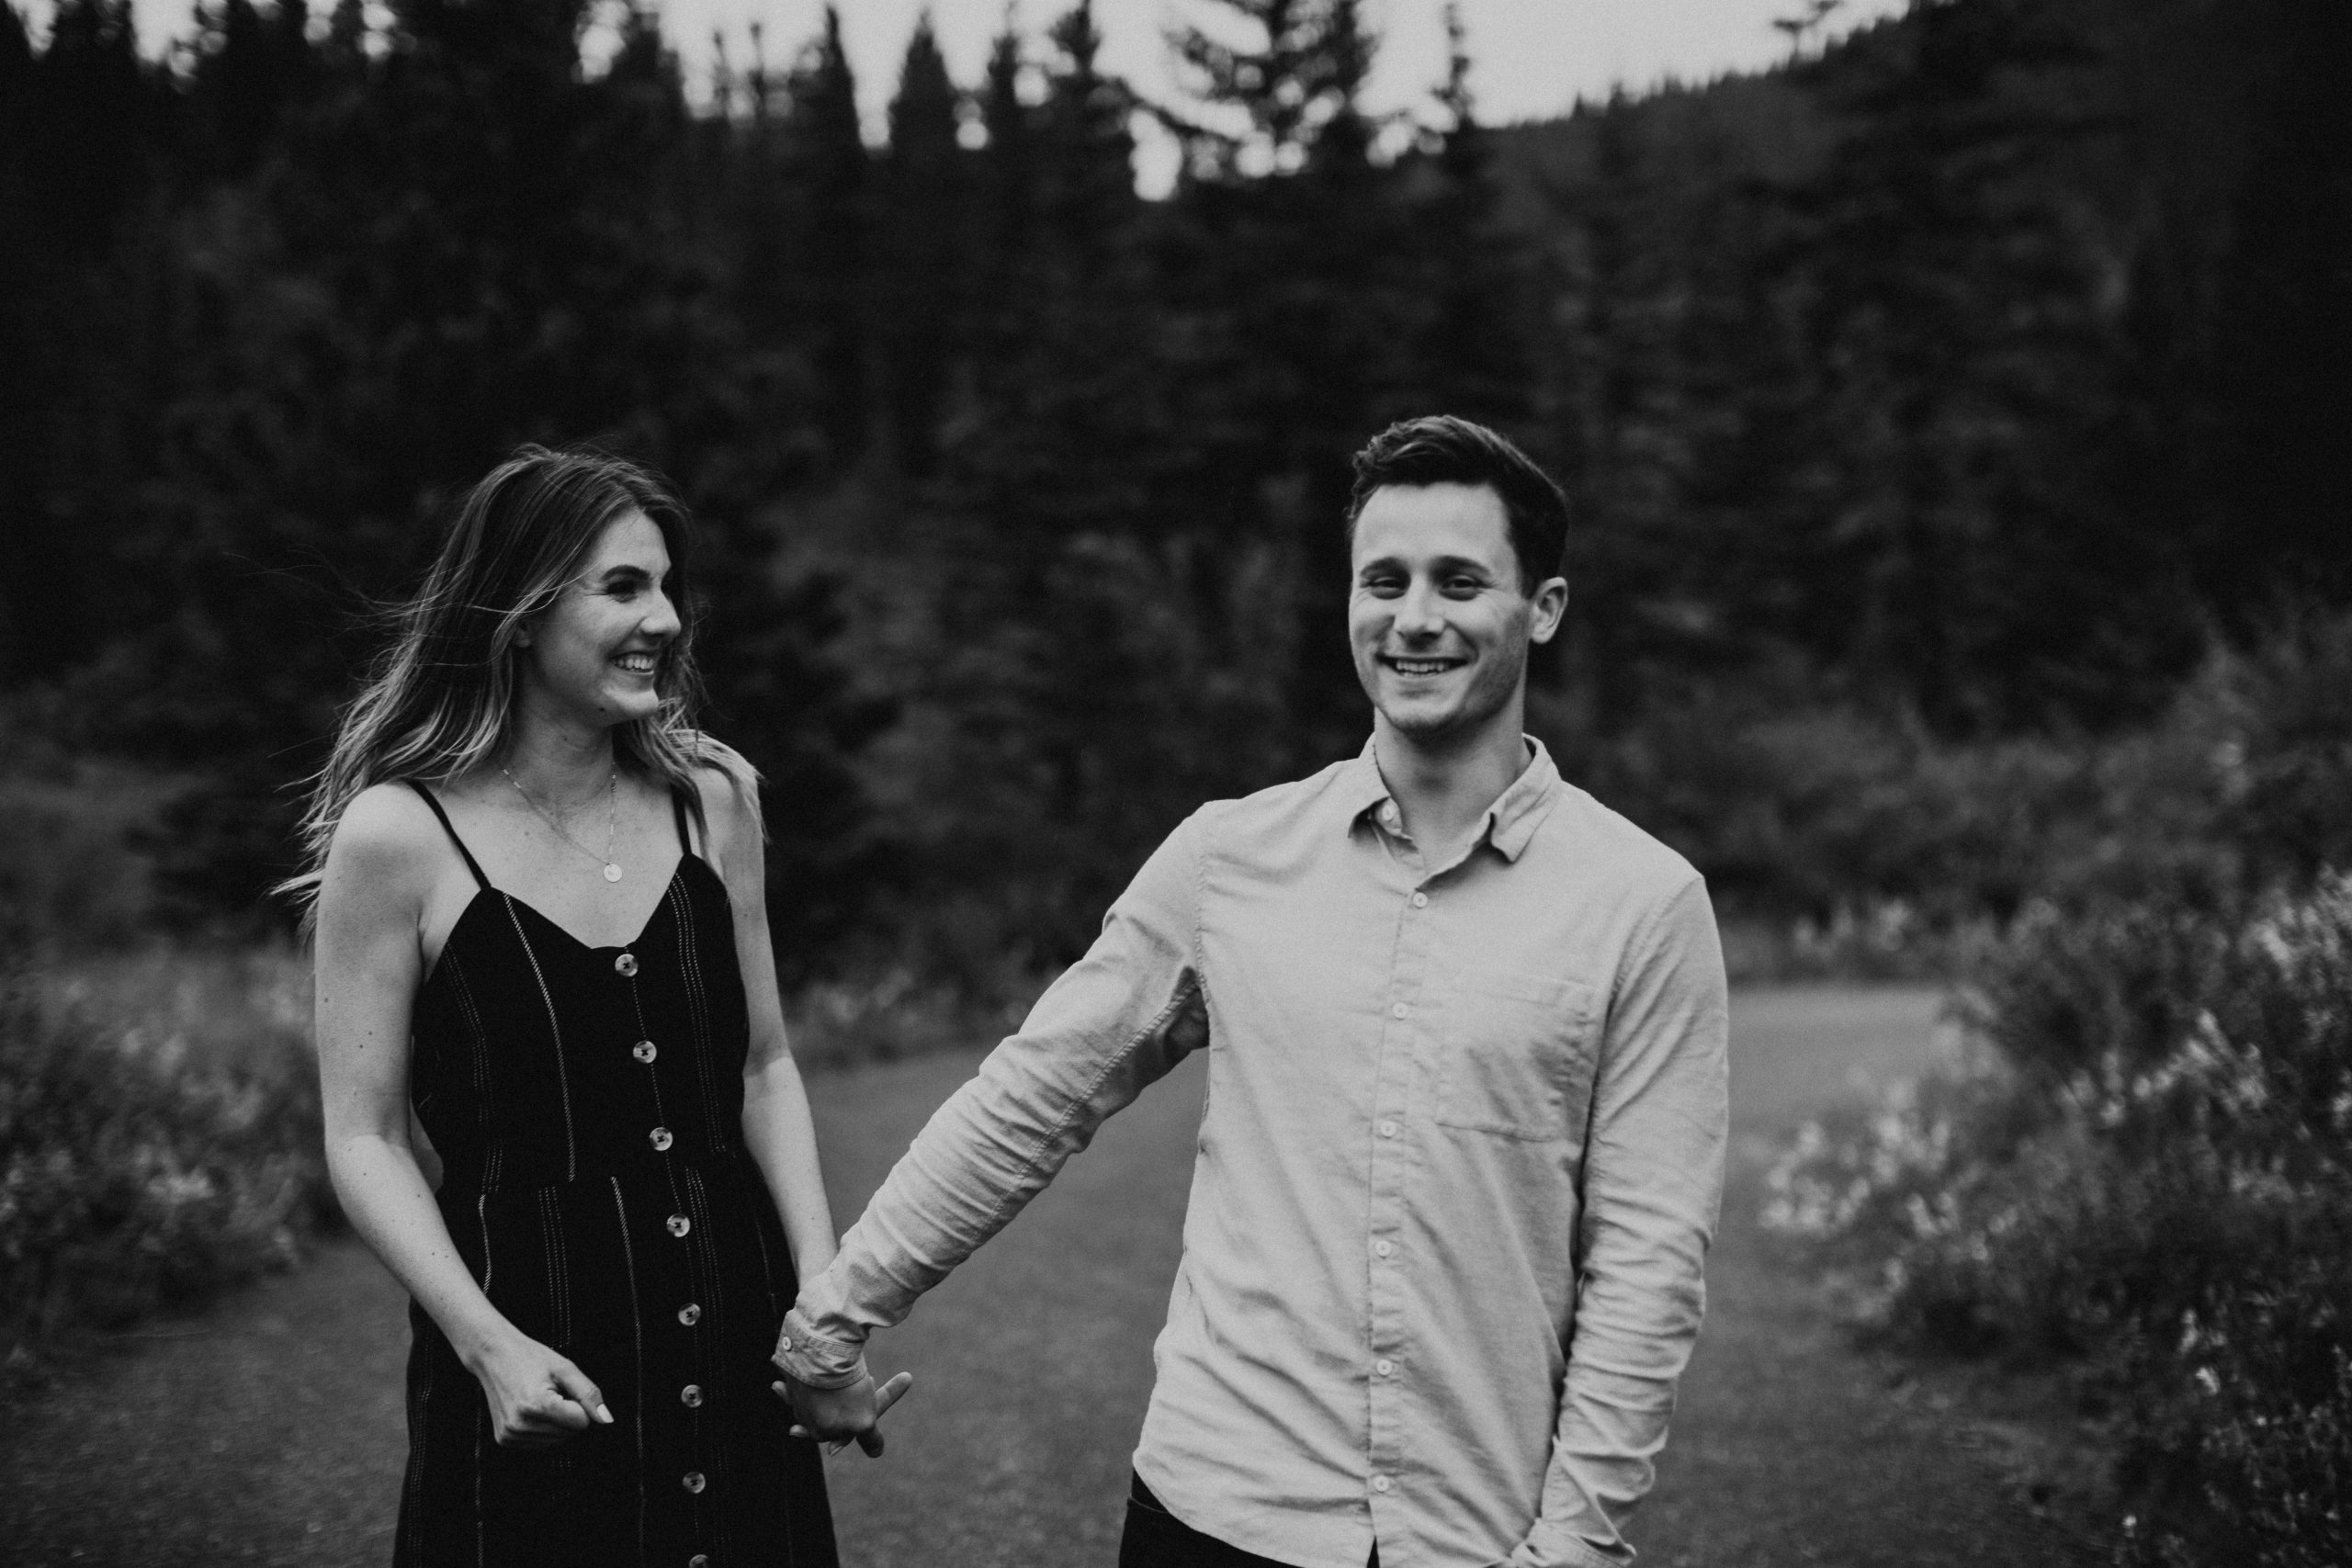 Barrier Lake Engagement Session, couple in kananaskis adventuring in the mountains together